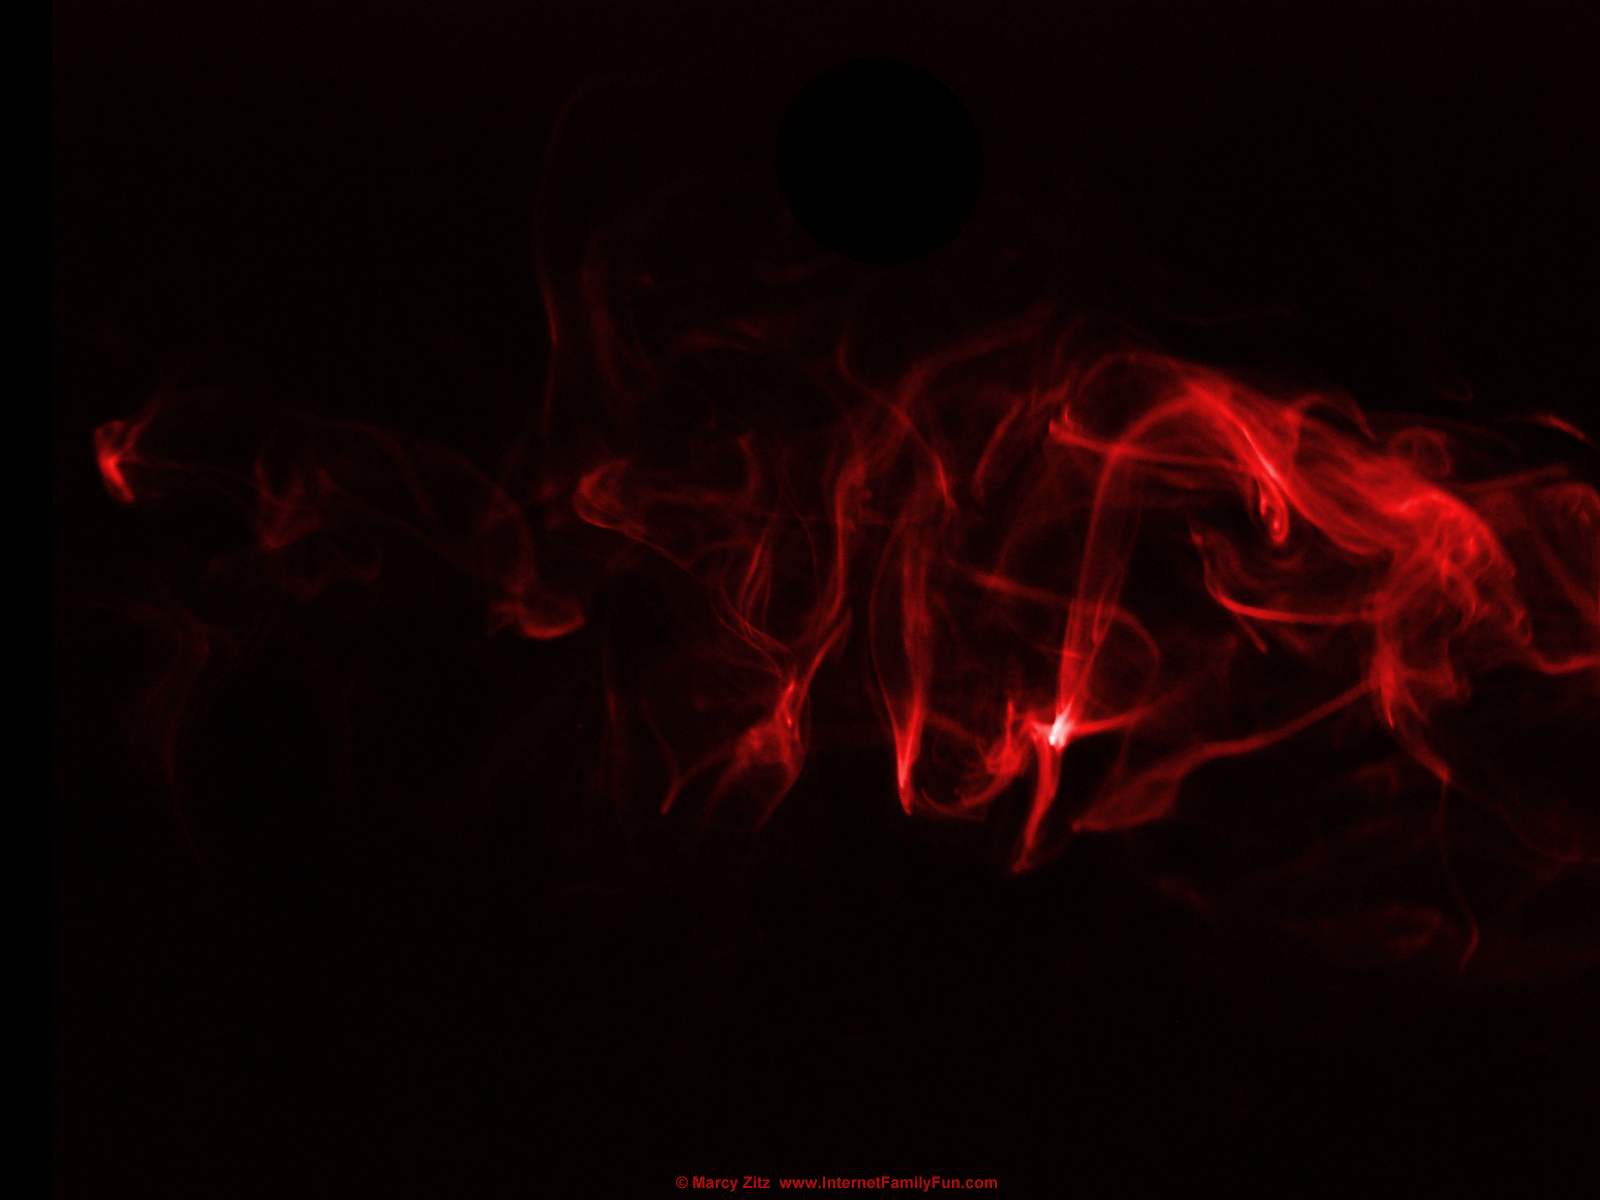 Abstract Smoke In Red Wallpaper Background For Desktop